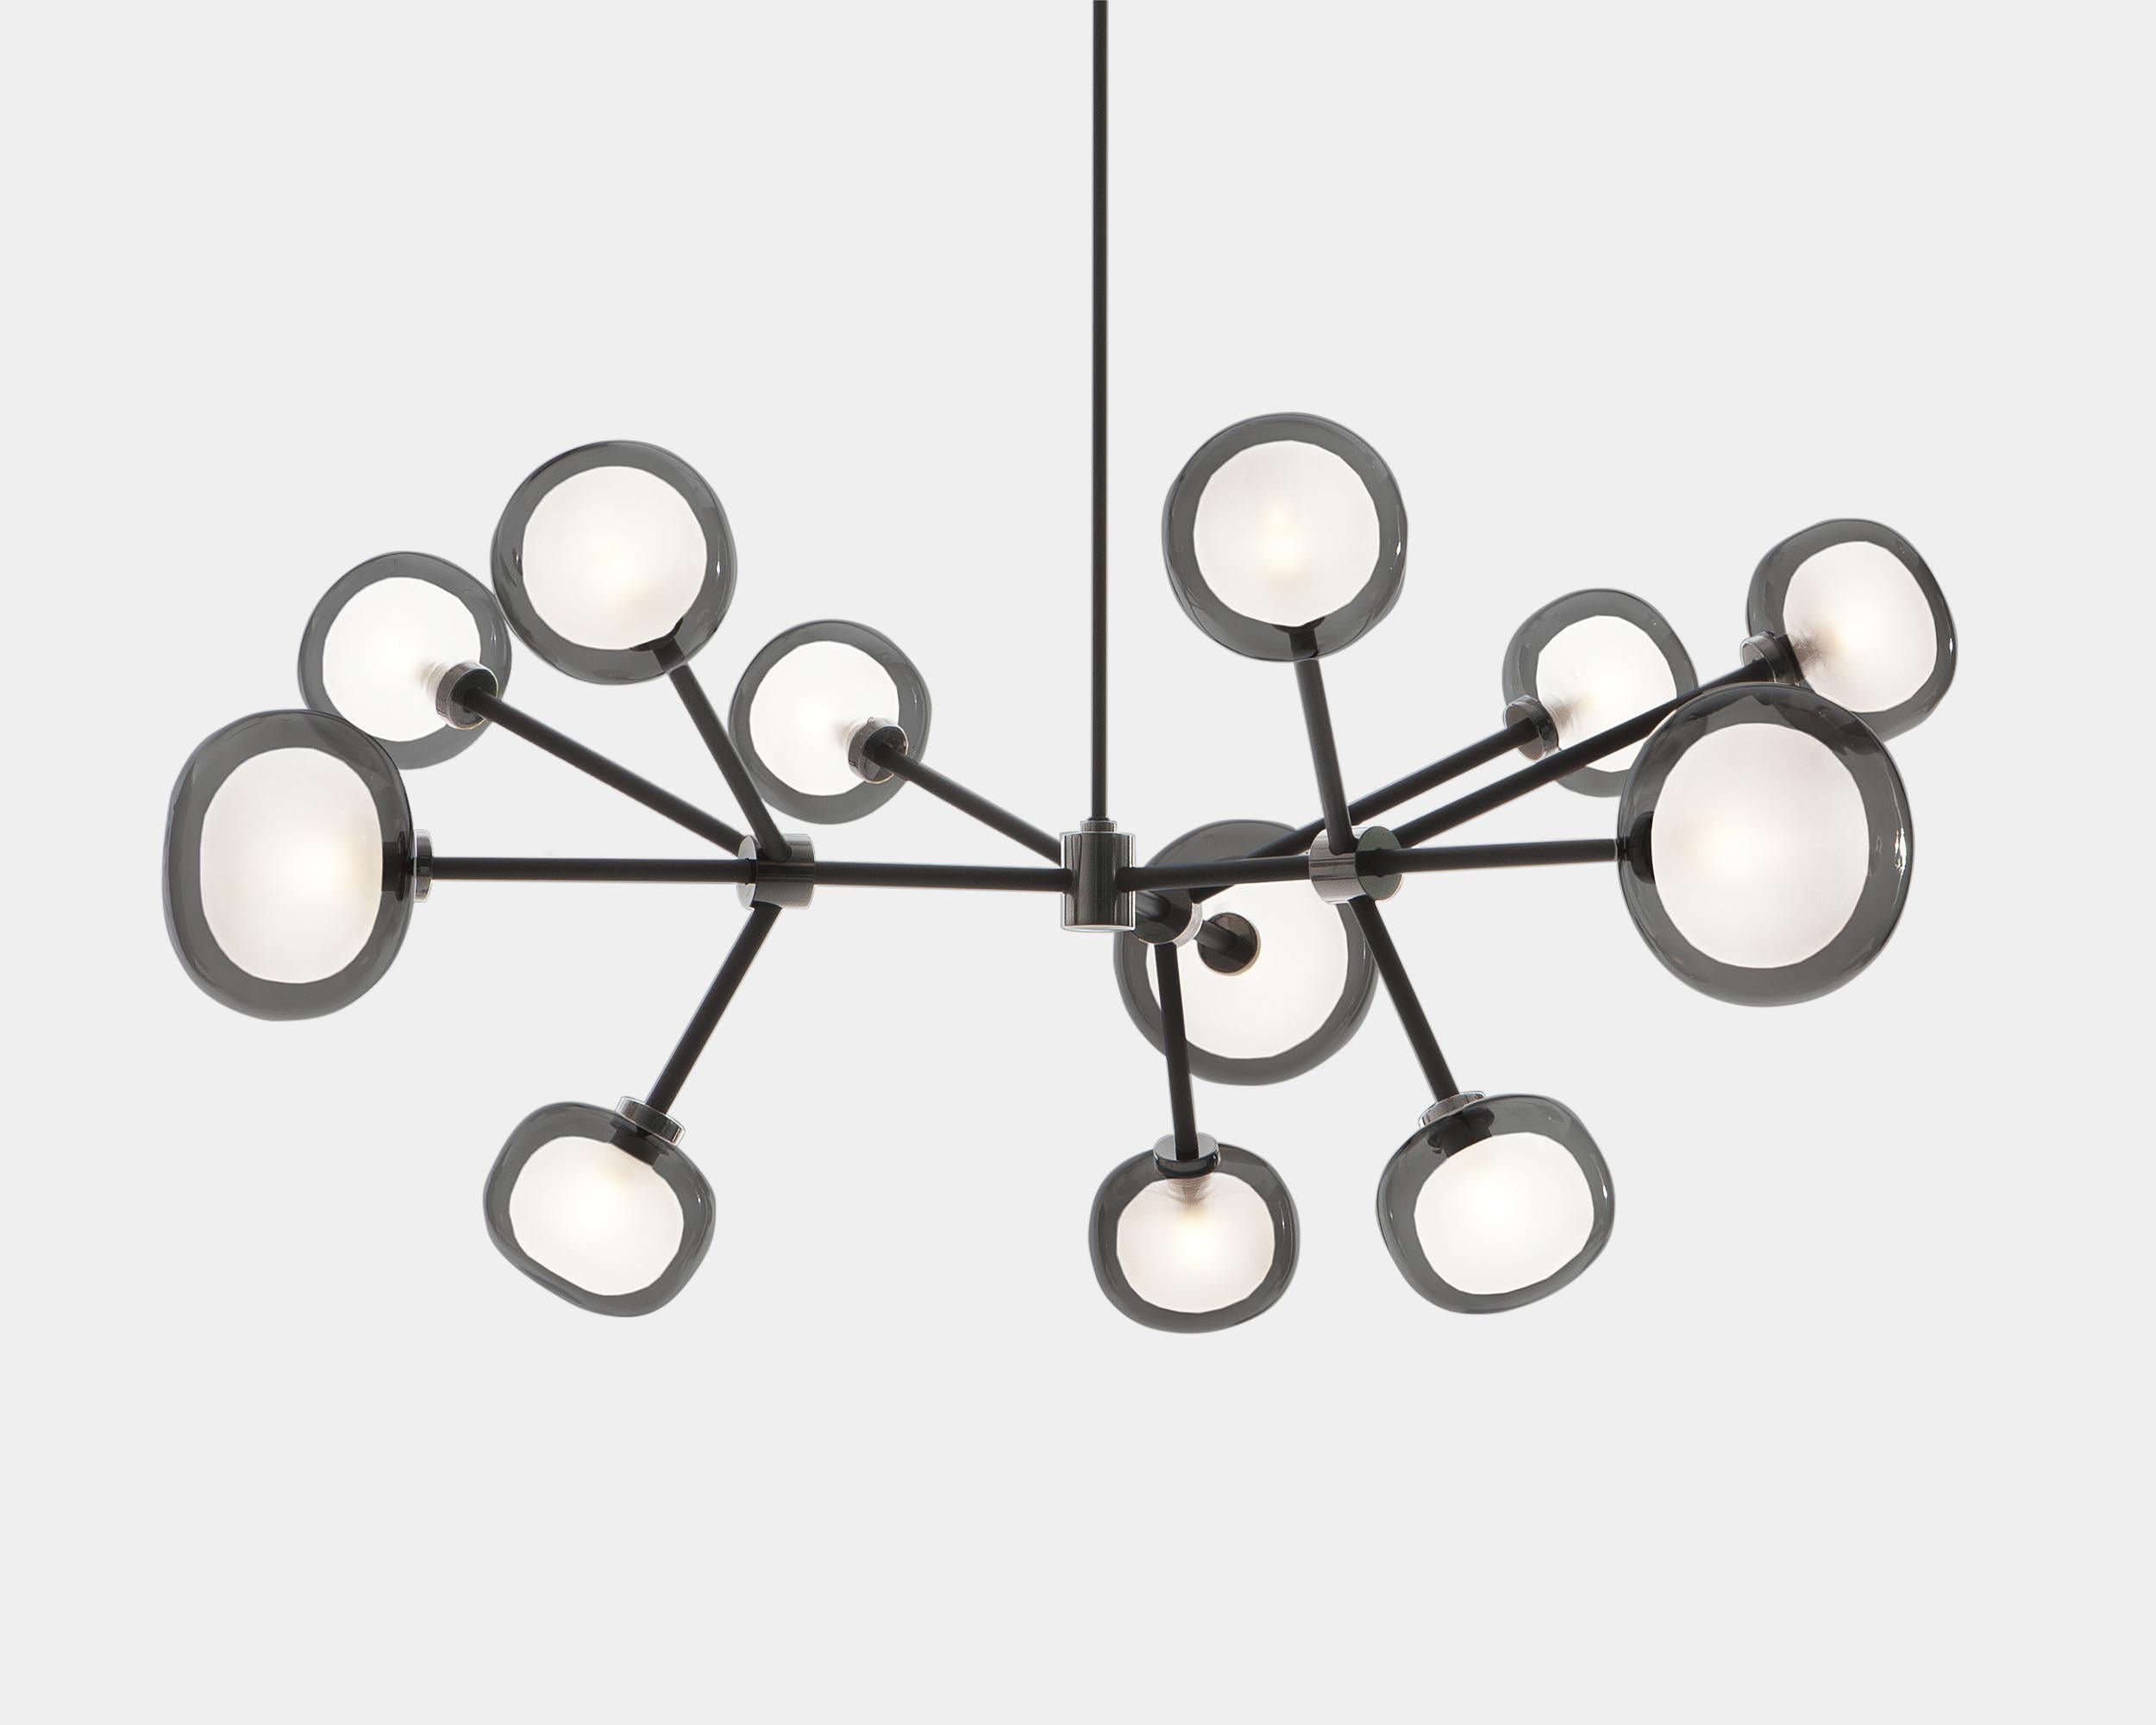 Chandelier Nabila 552.10 by Corrado Dotti x TOOY
12 lights
UL Listed Compliant with US electric system


Model shown: C2 + C41 + clear
Finish: Brushed brass
Color: Clear glass
Canopy: Ø 13 cm

Lighting source : 12 x G9 220/240V

Pendant: Cable